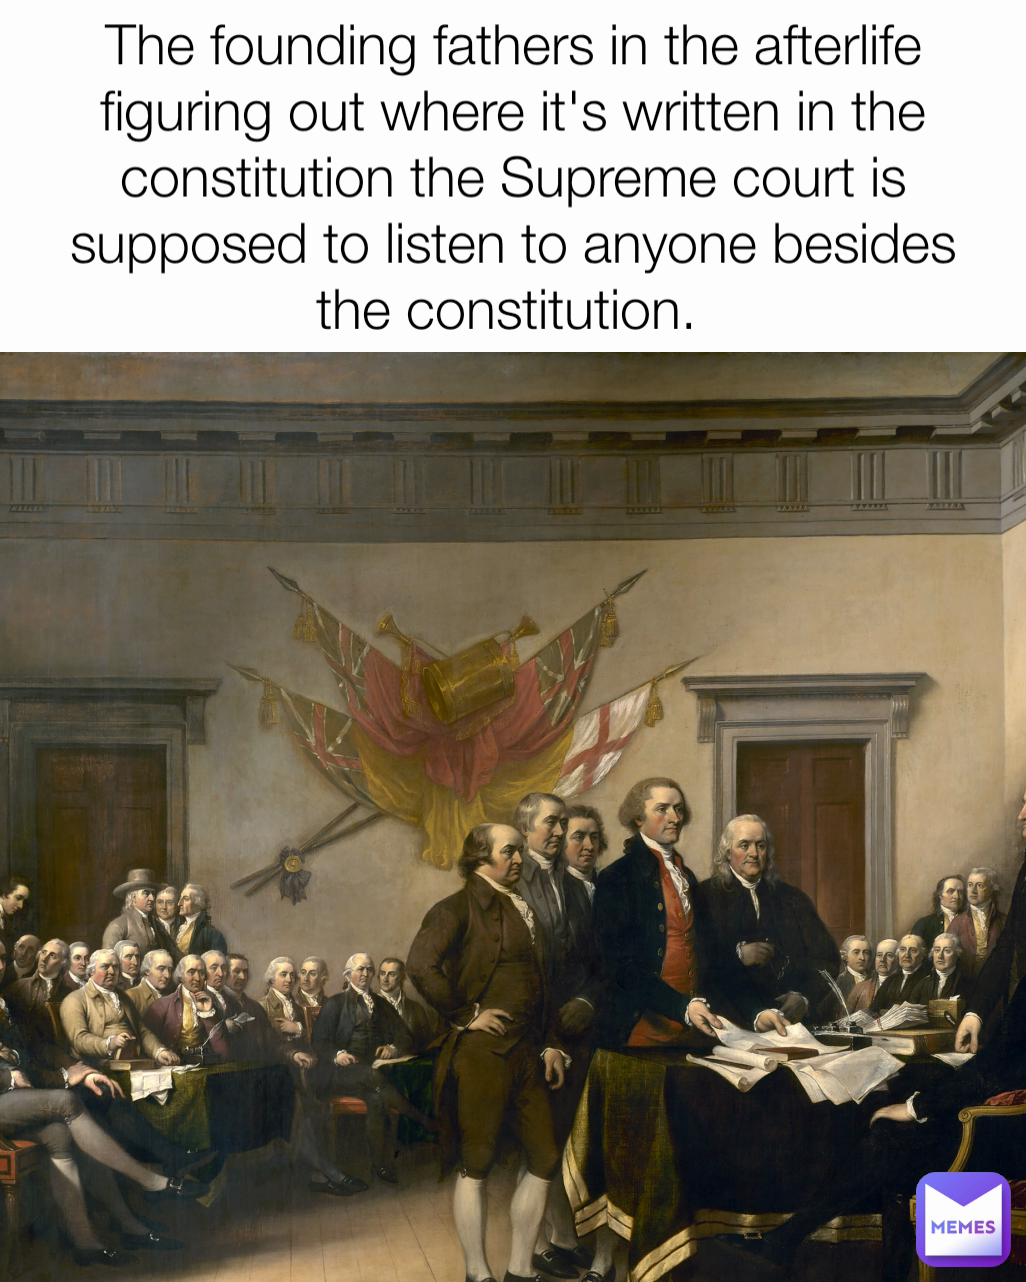 The founding fathers in the afterlife figuring out where it's written in the constitution the Supreme court is supposed to listen to anyone besides the constitution. 